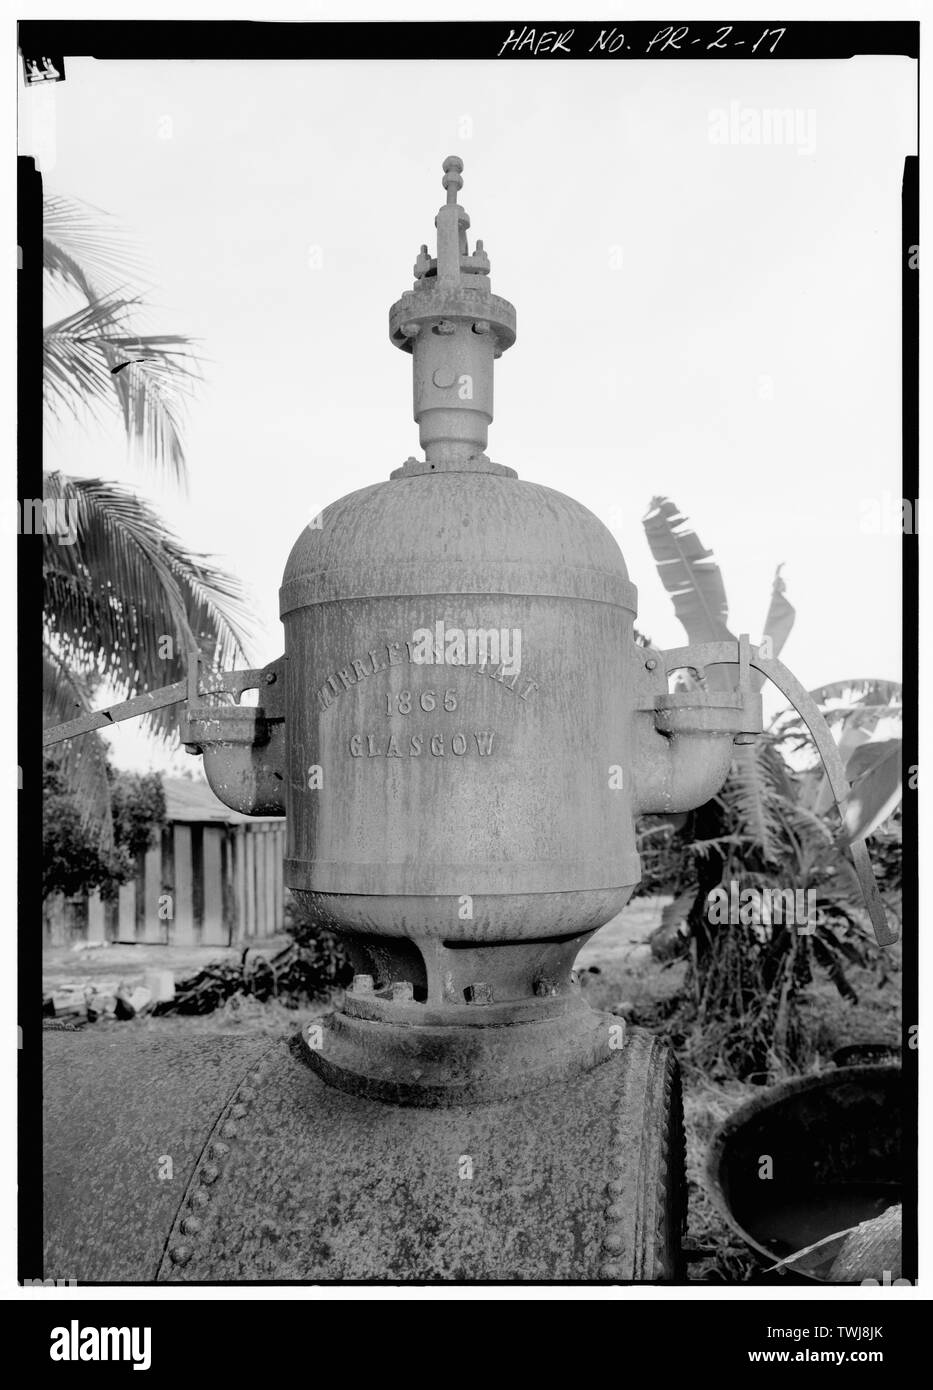 Side view of steam dome mounted on top of boiler; dome is marked 'Mirrlees and Tate, 1865, Glasgow.' - Hacienda Azucarera La Concepcion, Sugar Mill Ruins, .3 Mi. W. of Junction of Rts. 418 and 111, Victoria, Agaudilla Municipio, PR; Quinones, Dona Eulalia; Cardona, Jose Weston; Central Coloso; Mirrlees and Tait; Johnson, Robert L, field team; Griffin, Douglas L, project manager; DeLony, Eric N, project manager; Conservation Trust of Puerto Rico, sponsor; Freeman, Belmont, delineator; del Cueto, Beatriz, delineator; Yasuda, Beverly, delineator; Williams, Joan, historian; Boucher, Jack, photogra Stock Photo